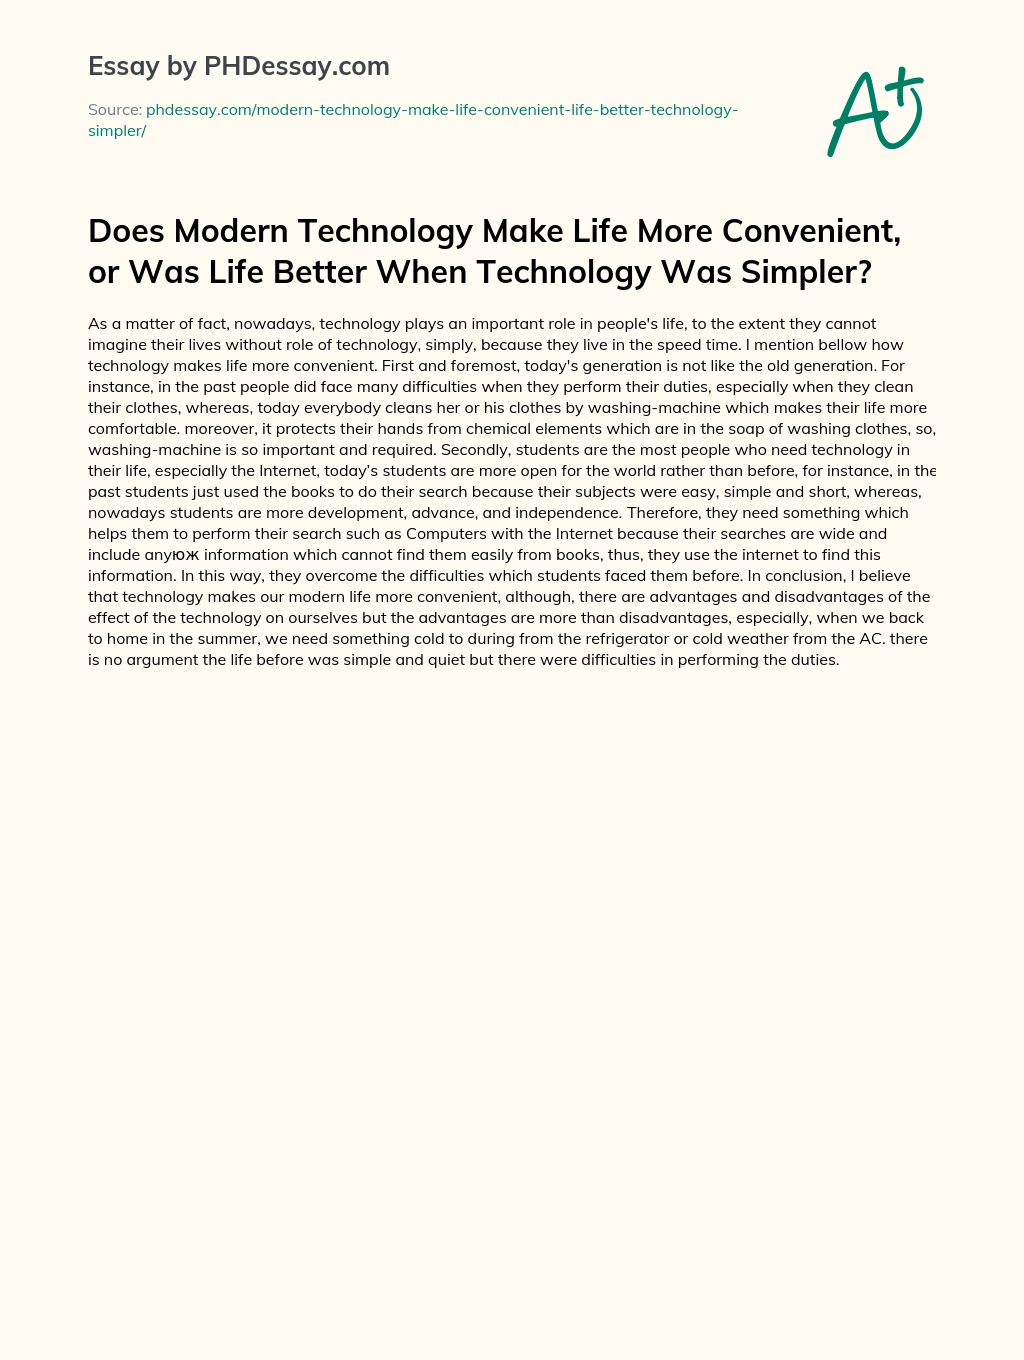 Does Modern Technology Make Life More Convenient, or Was Life Better When Technology Was Simpler? essay